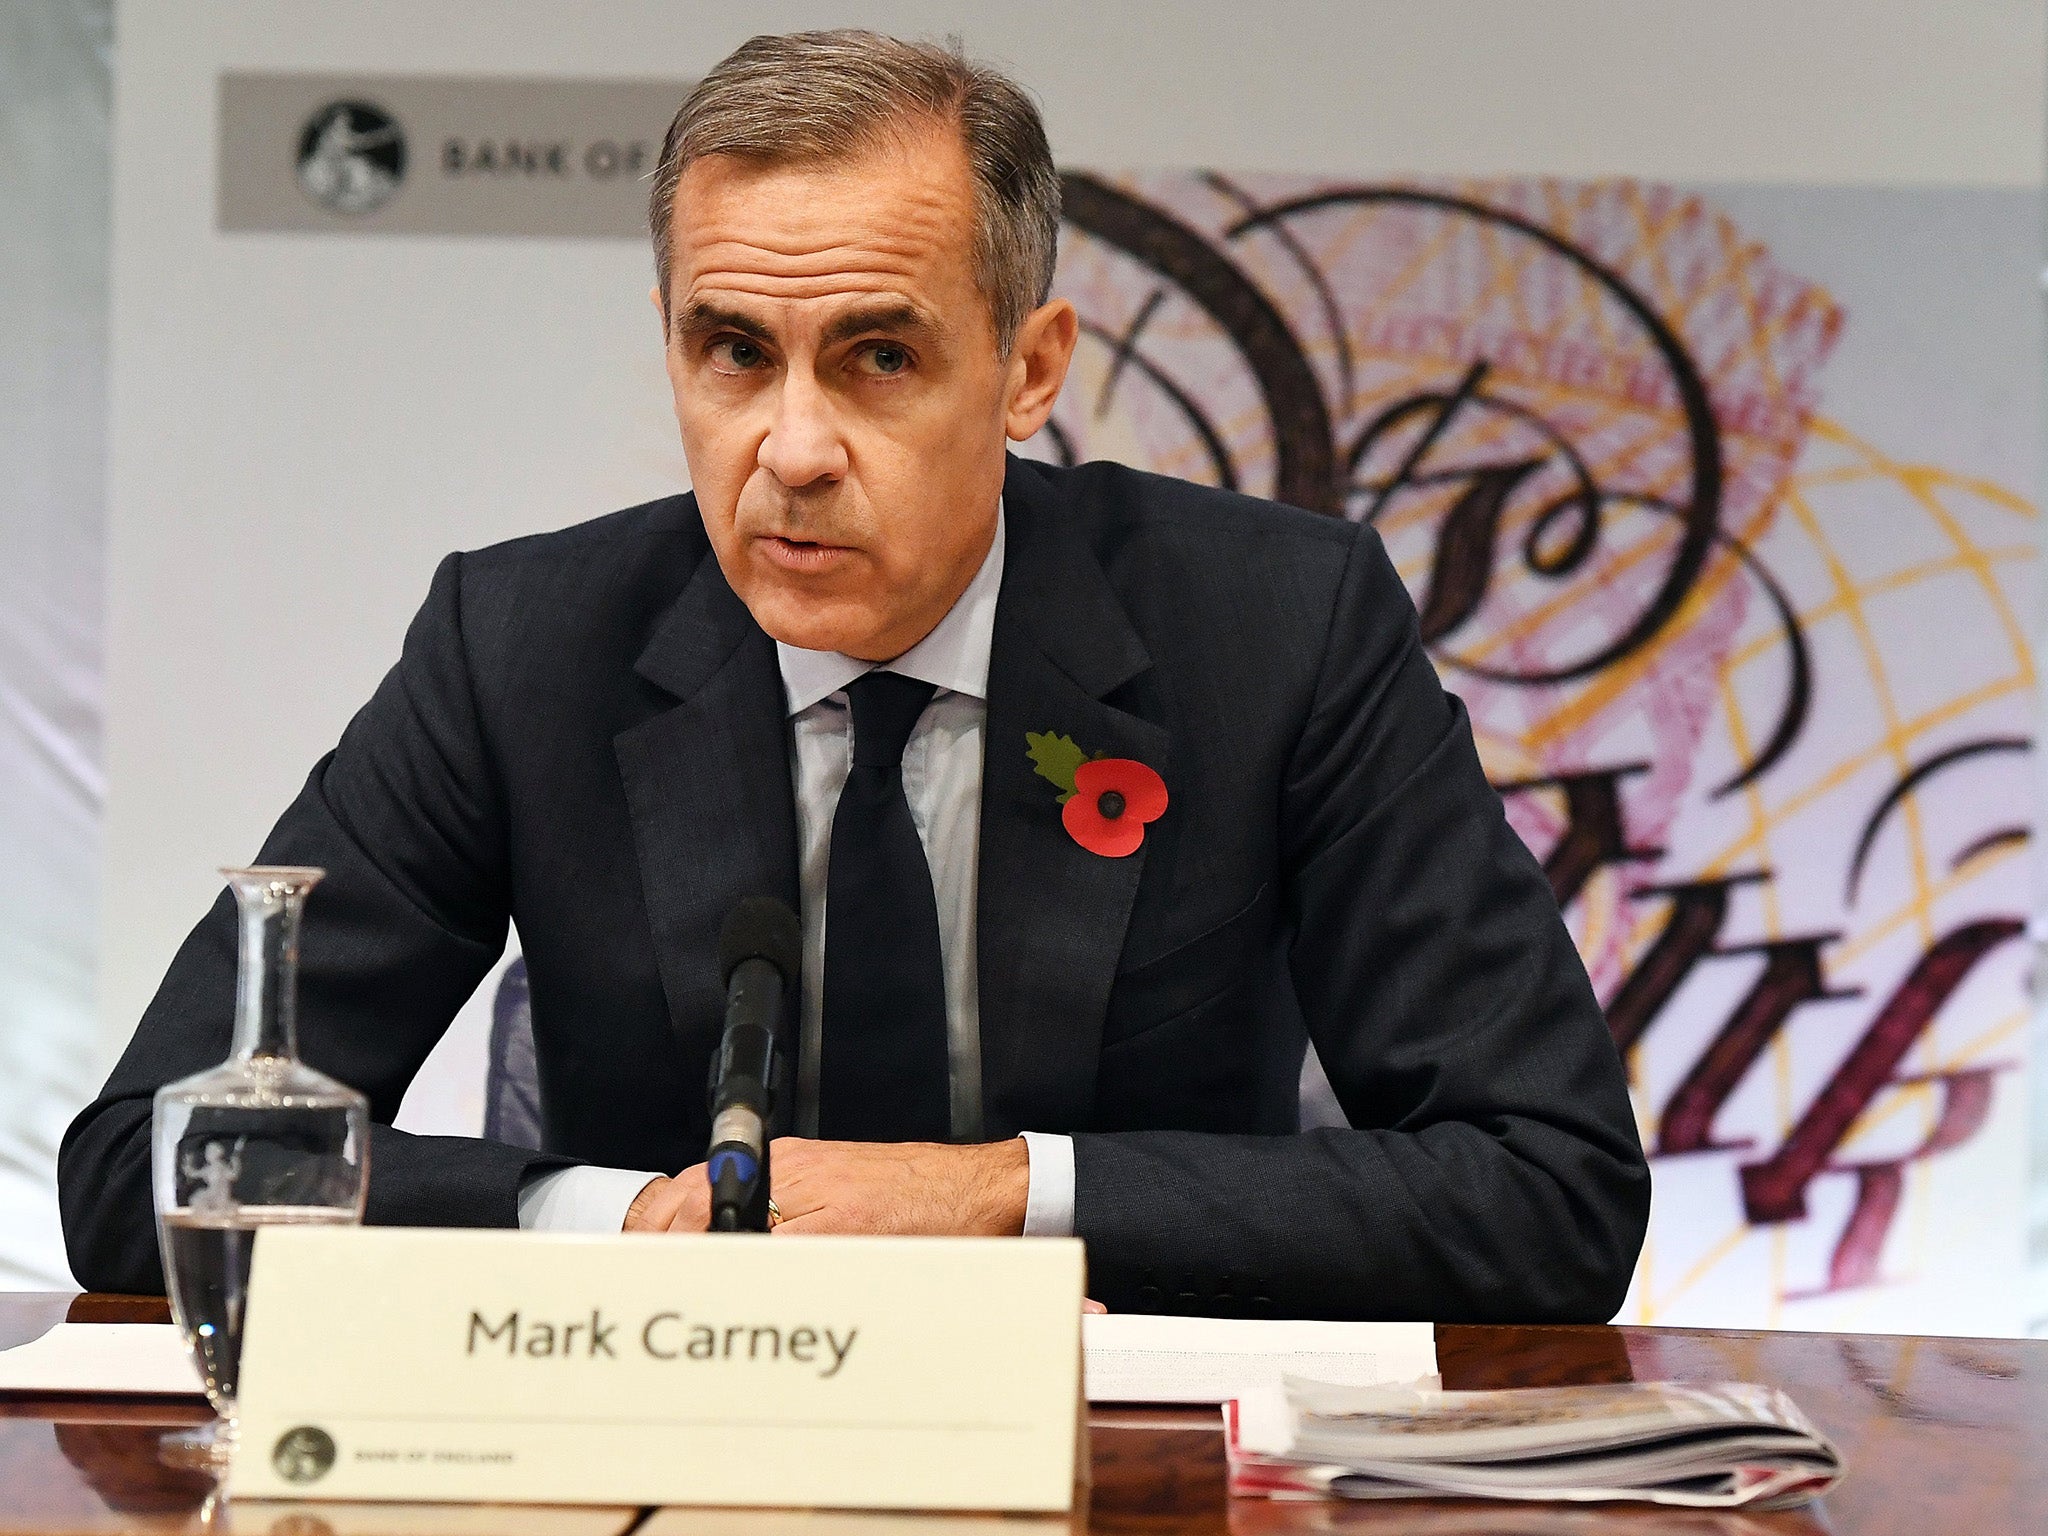 Mr Carney said that the Bank’s central Brexit scenario involved a smooth transition for the UK